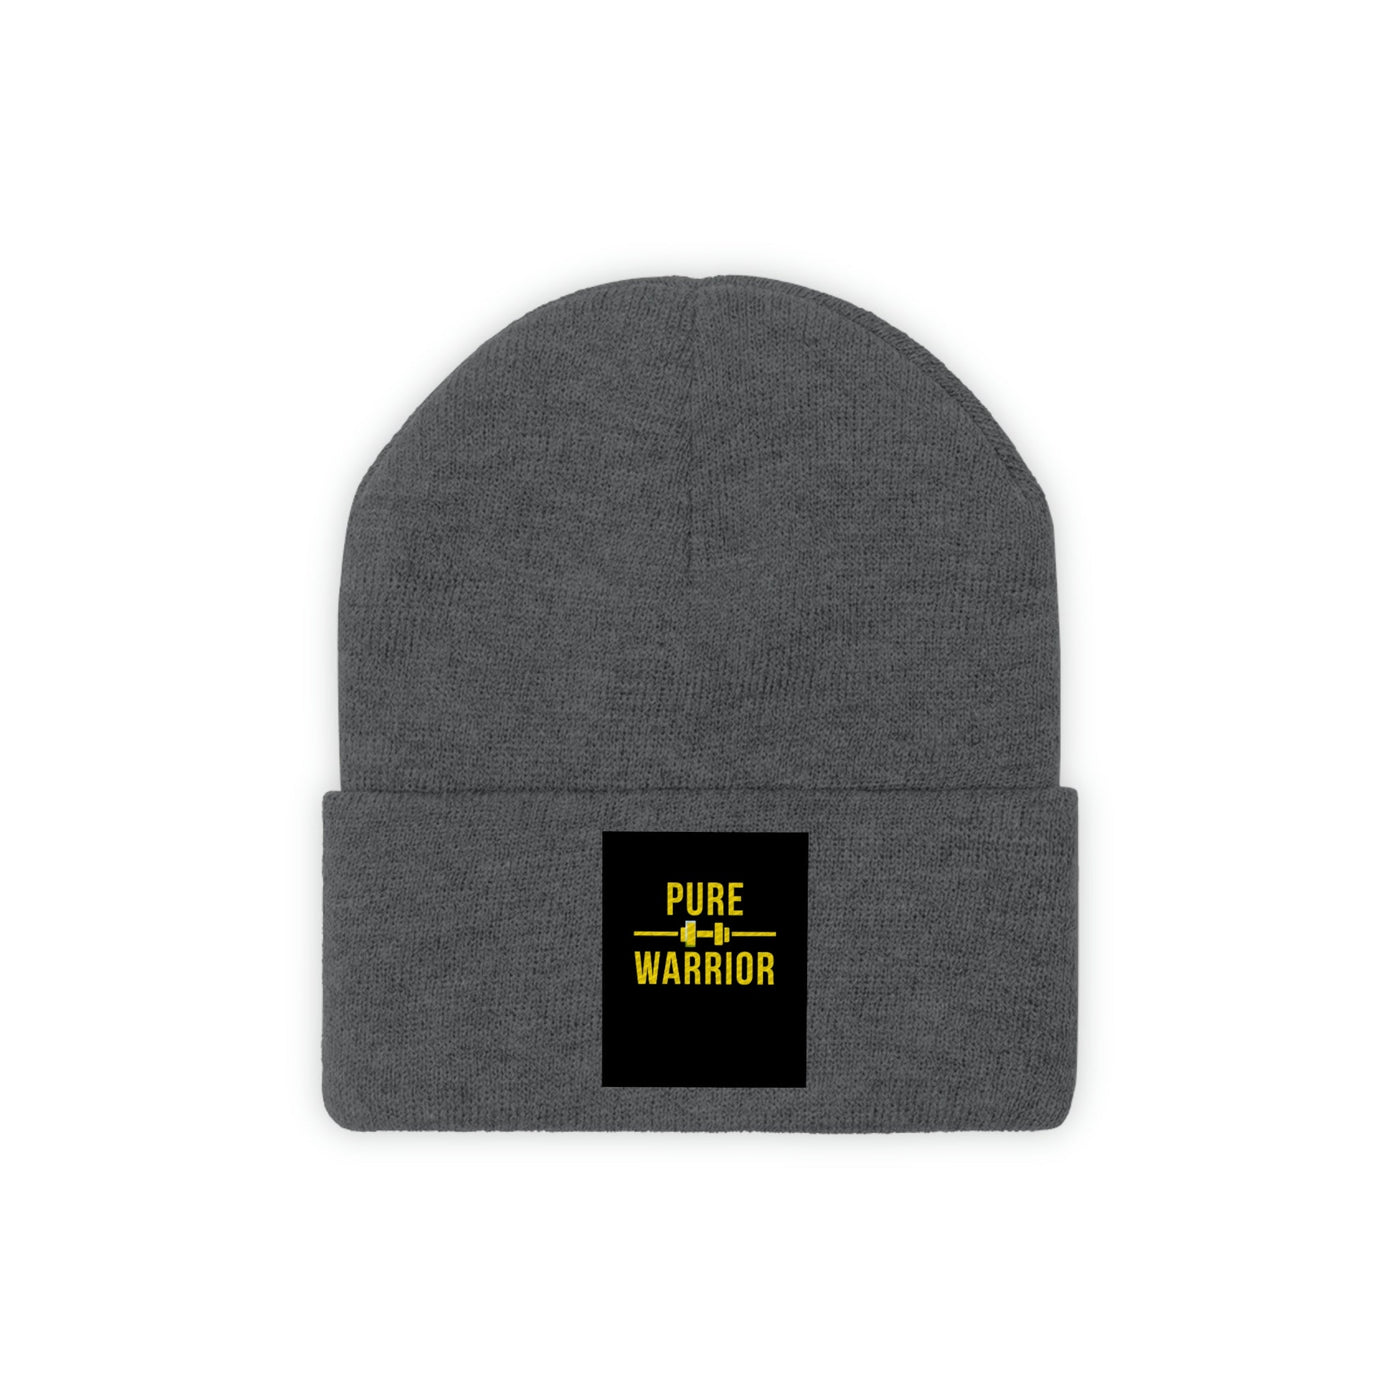 The Pure Warrior Black/Yellow/Grey Knit Beanie Hat